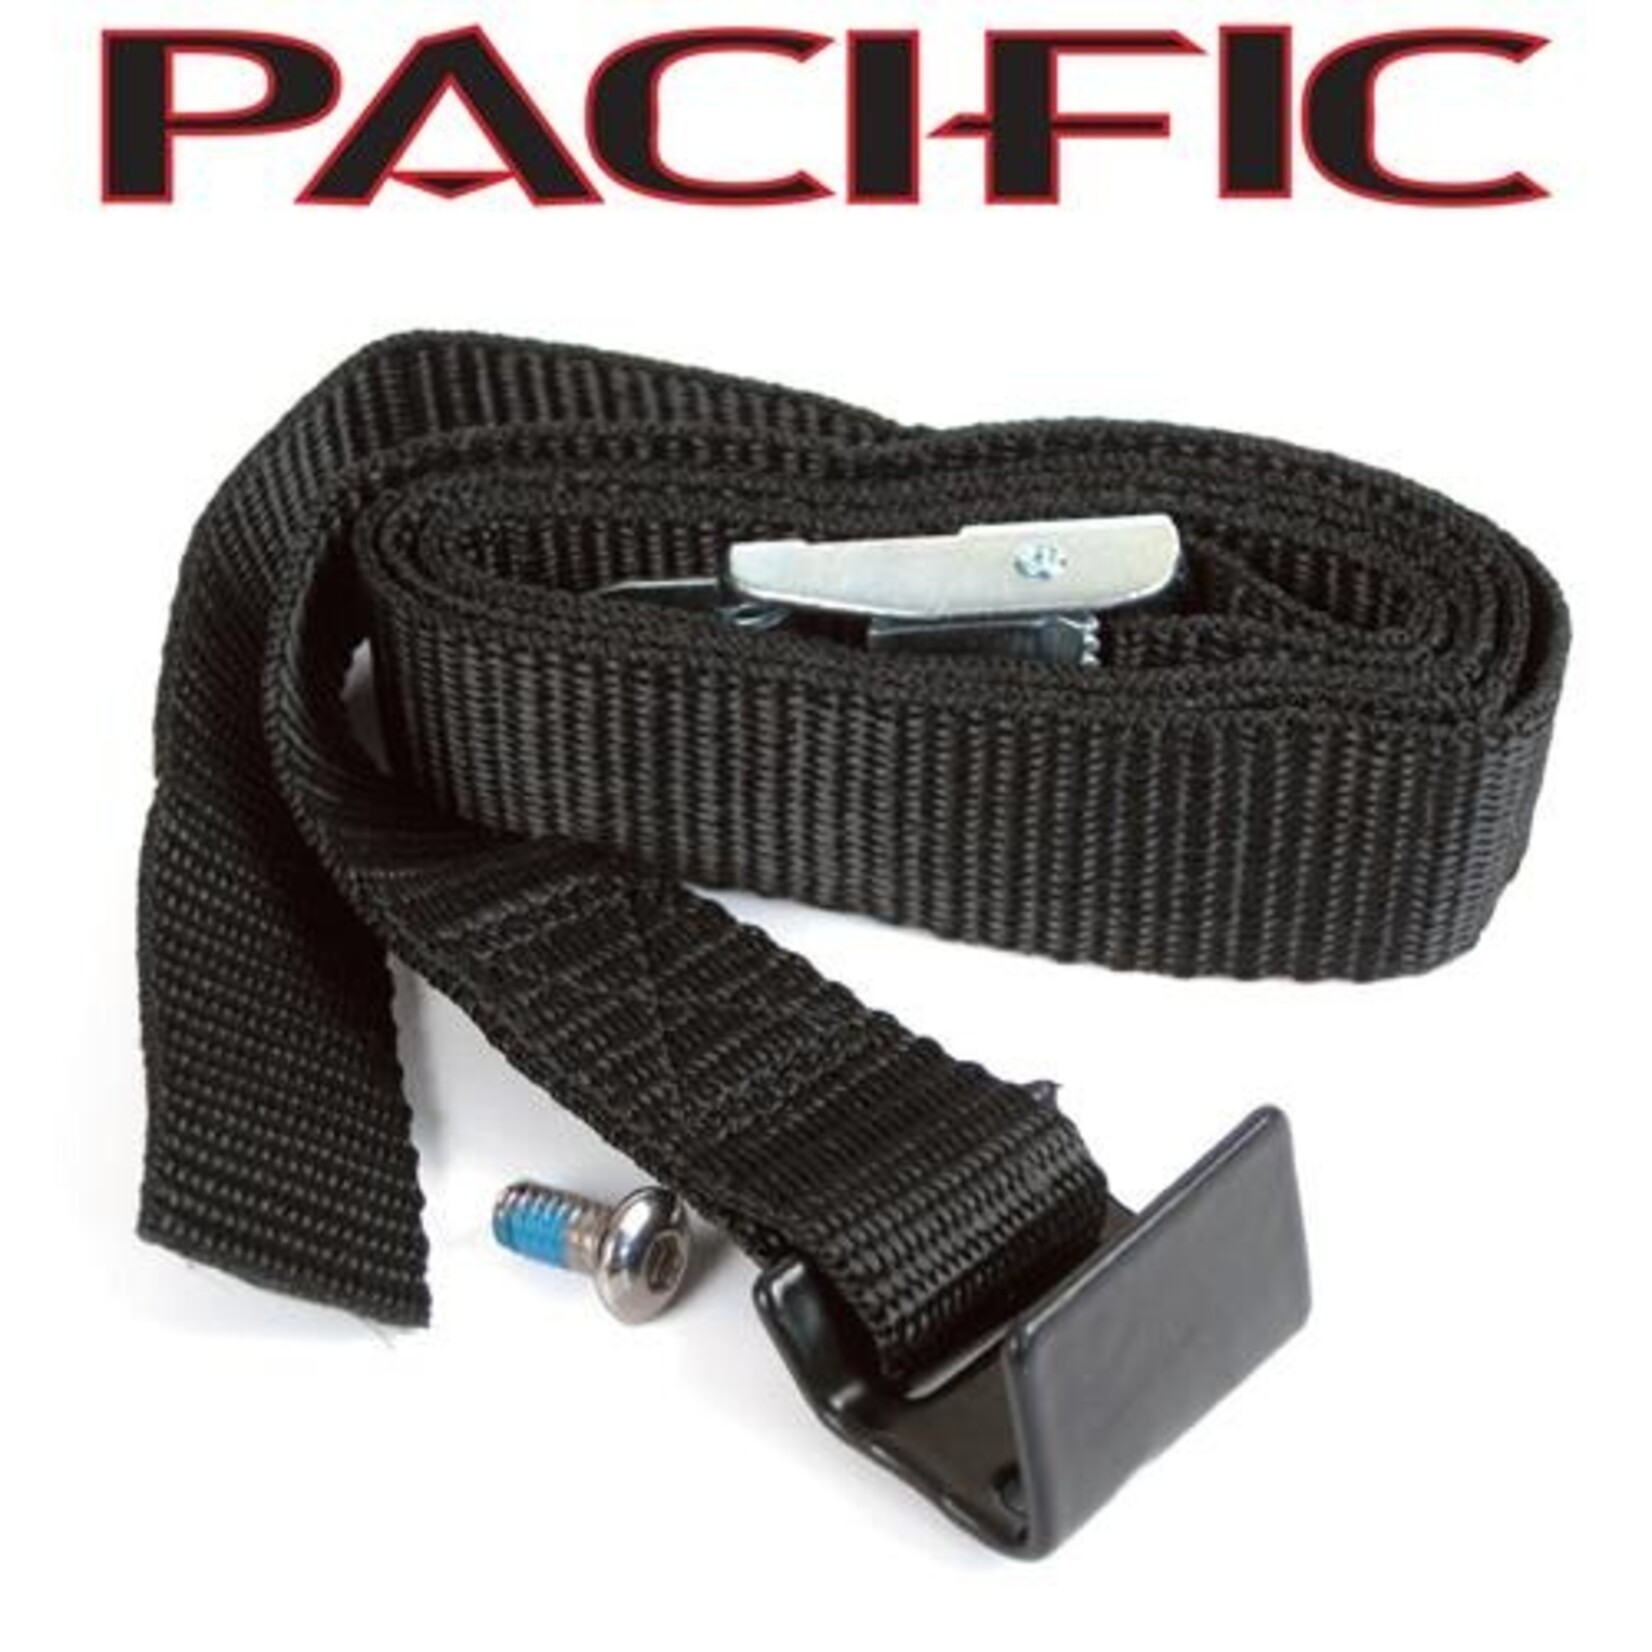 pacific Pacific Bike/Cycling Carrier Rack Parts - A-Frame Stability Strap